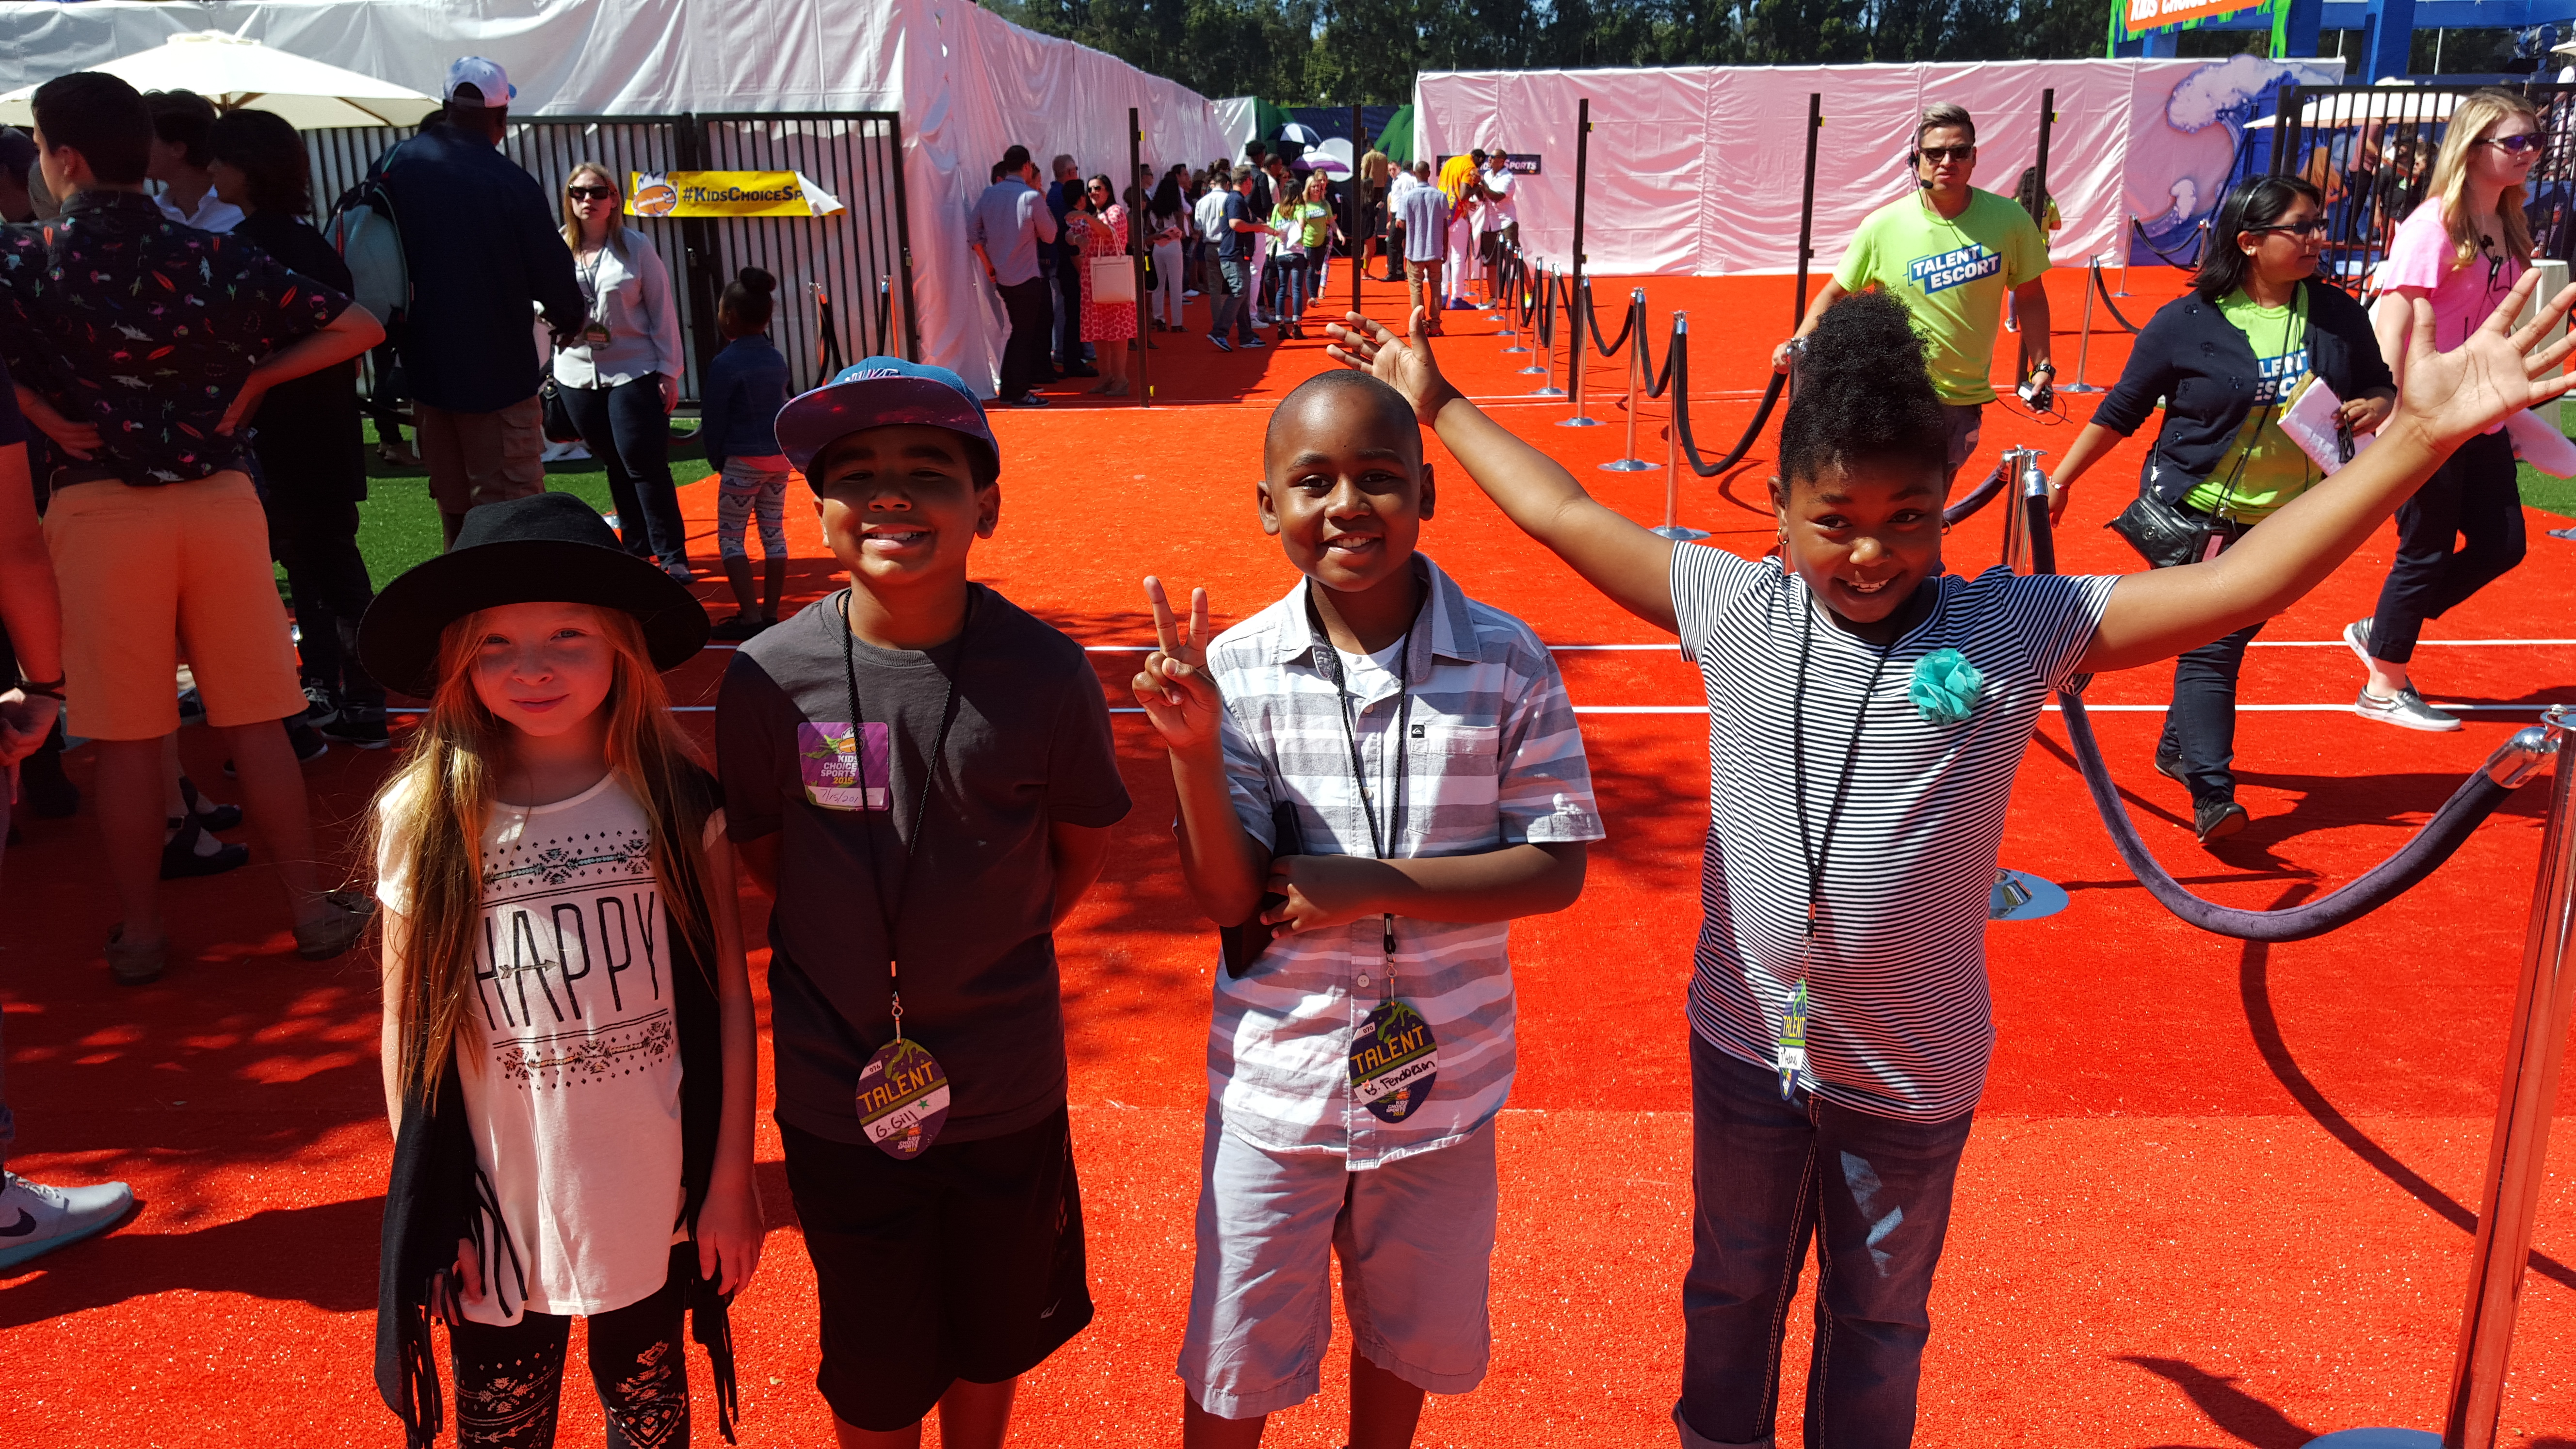 Brayden and his friends on the Nickelodeon Orange Carpet for the Kids Choice Sports Awards 2015